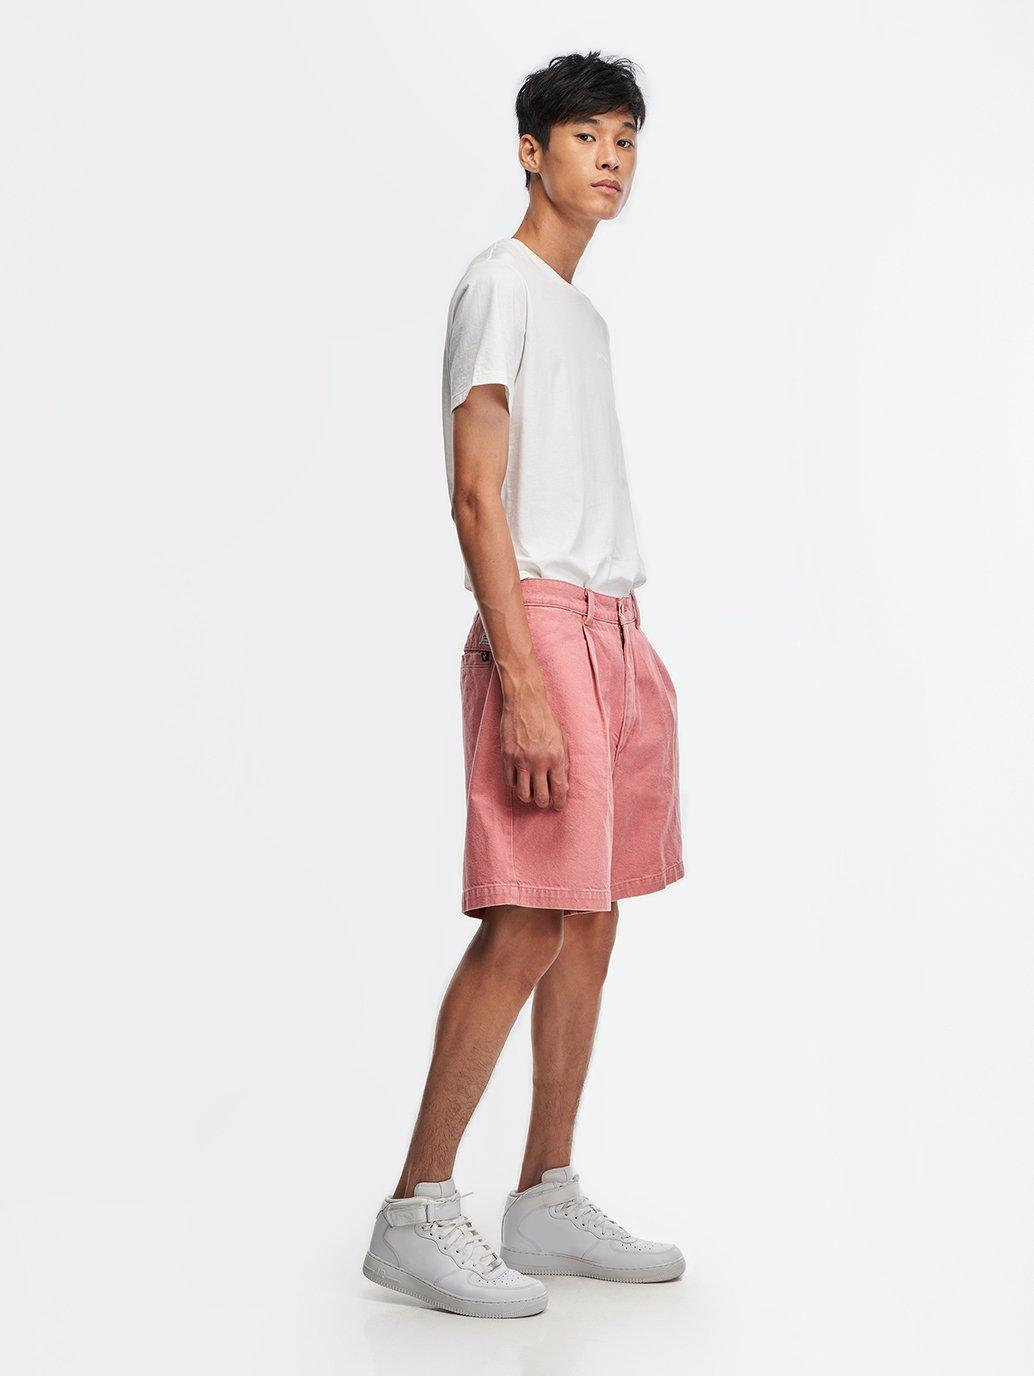 levis singapore mens xx chino pleated shorts A22520004 13 Details